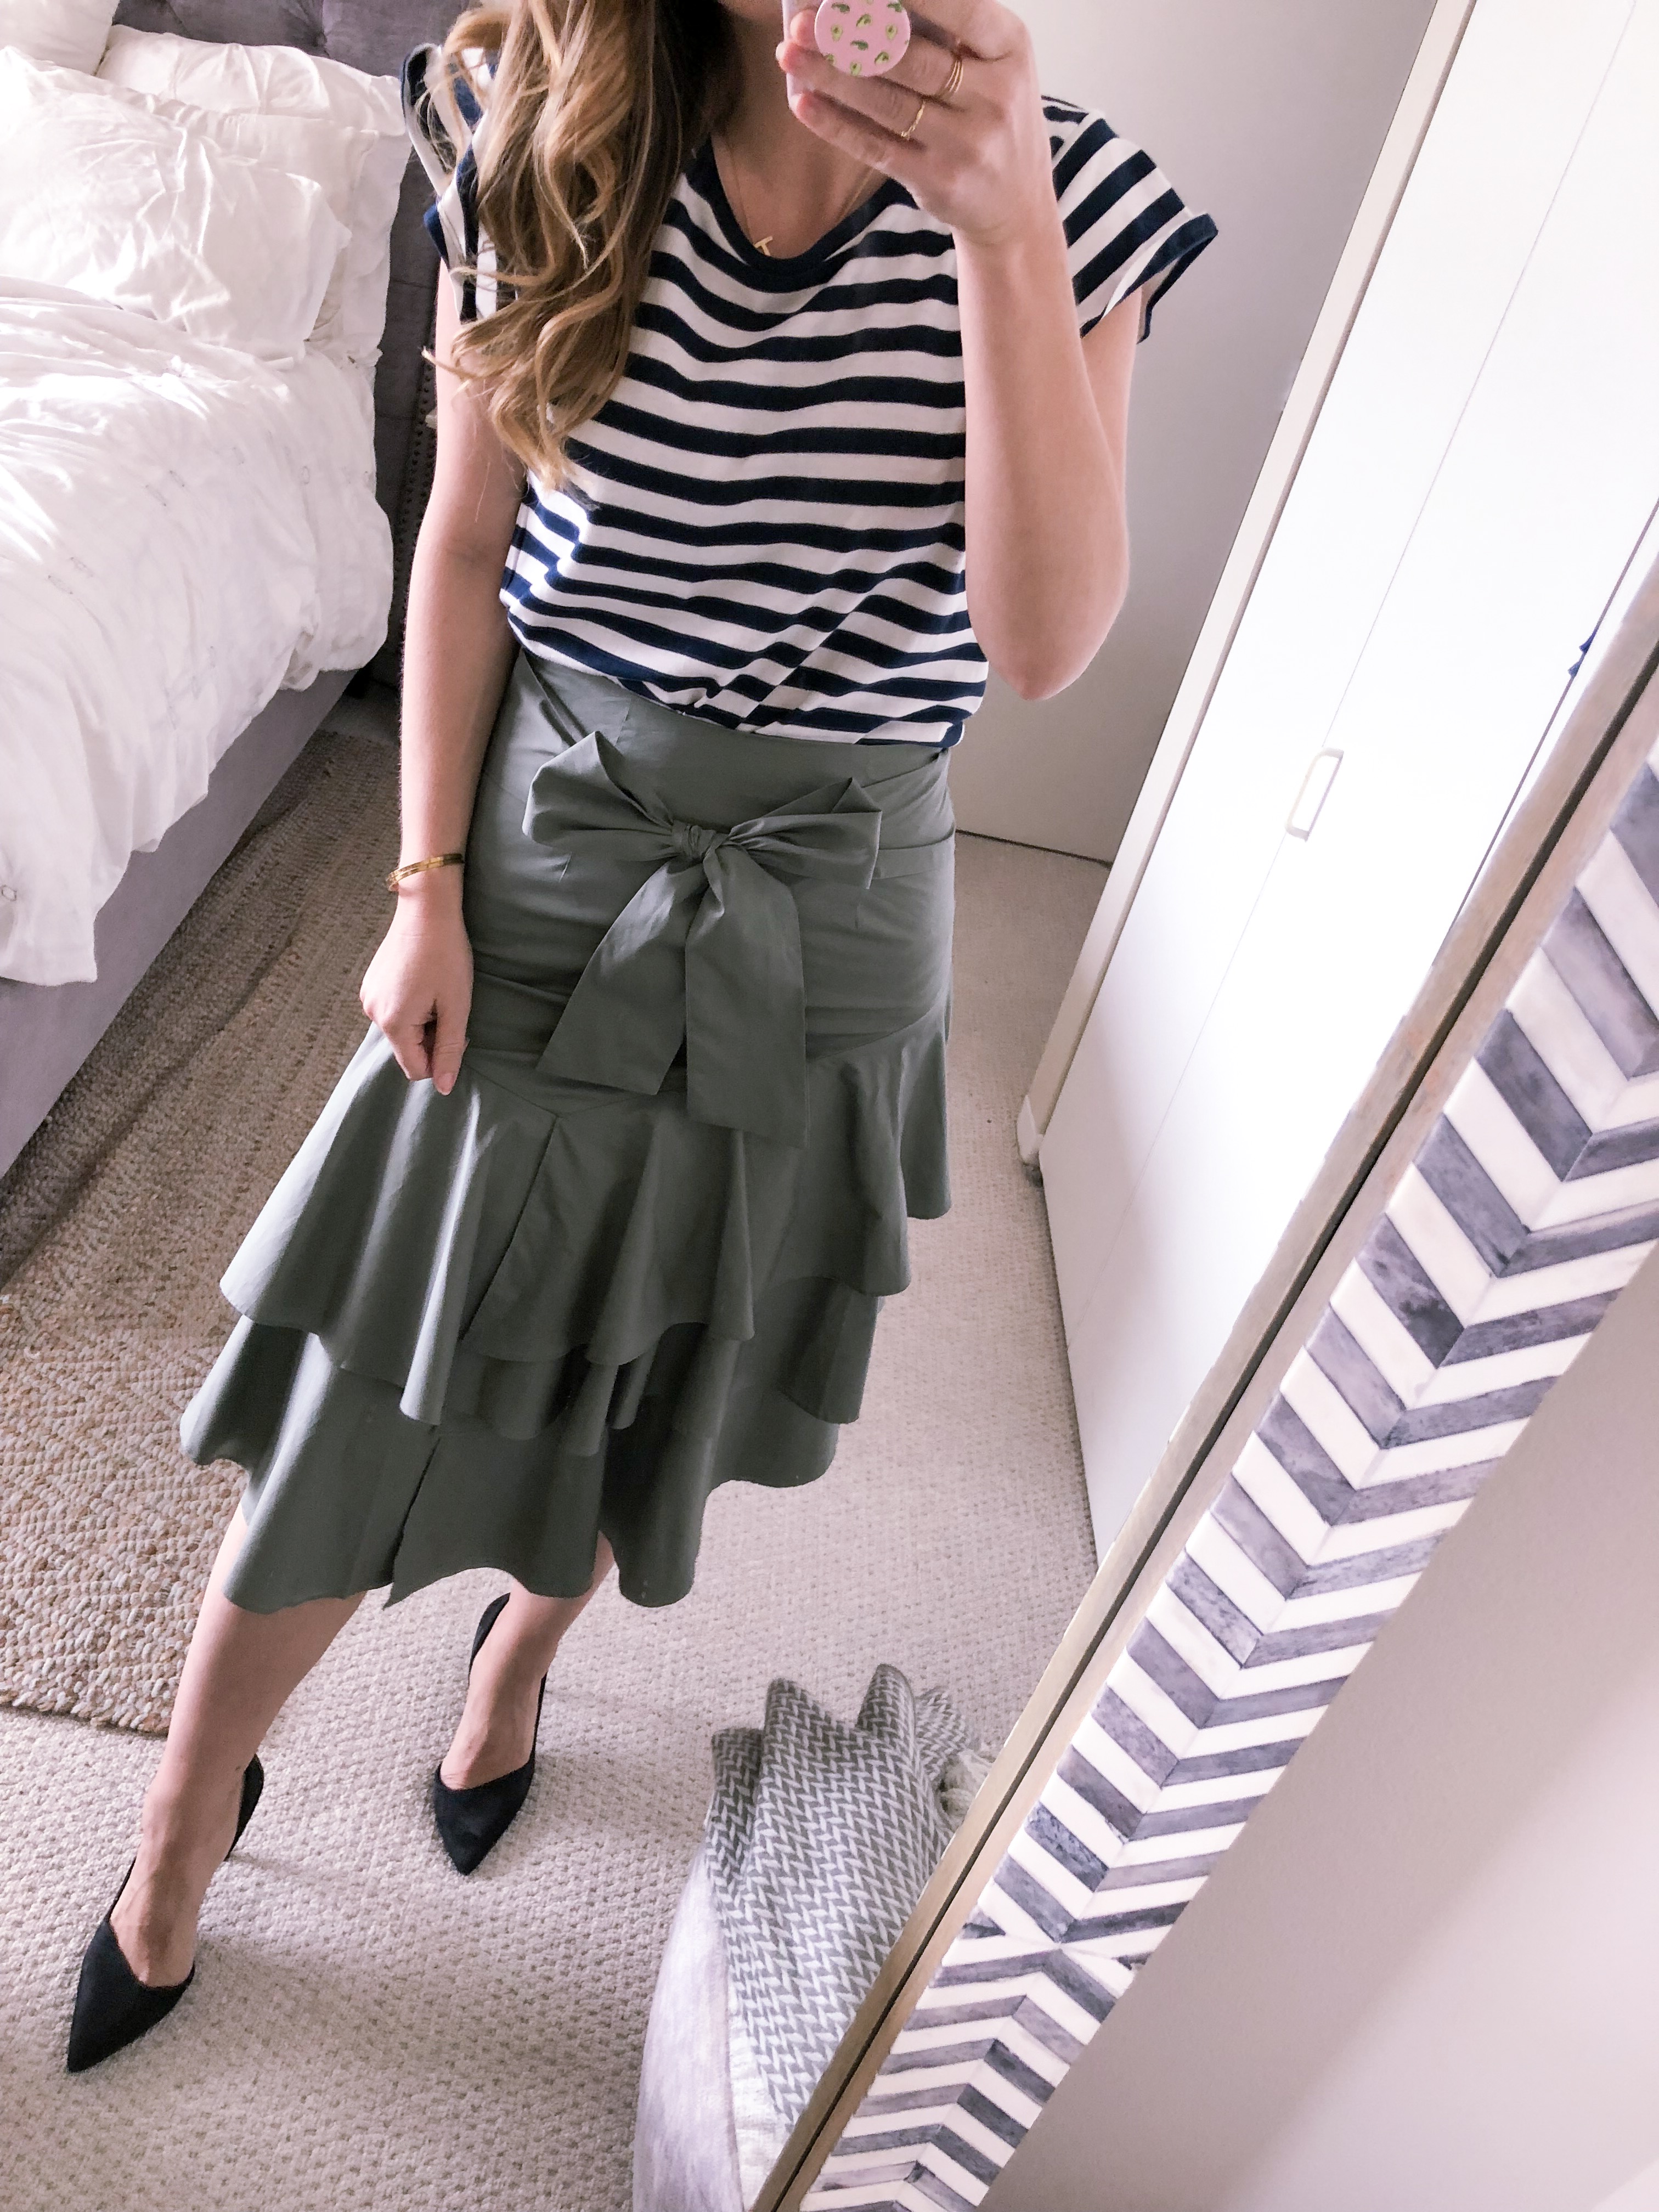 olive ruffled skirt with a navy striped top